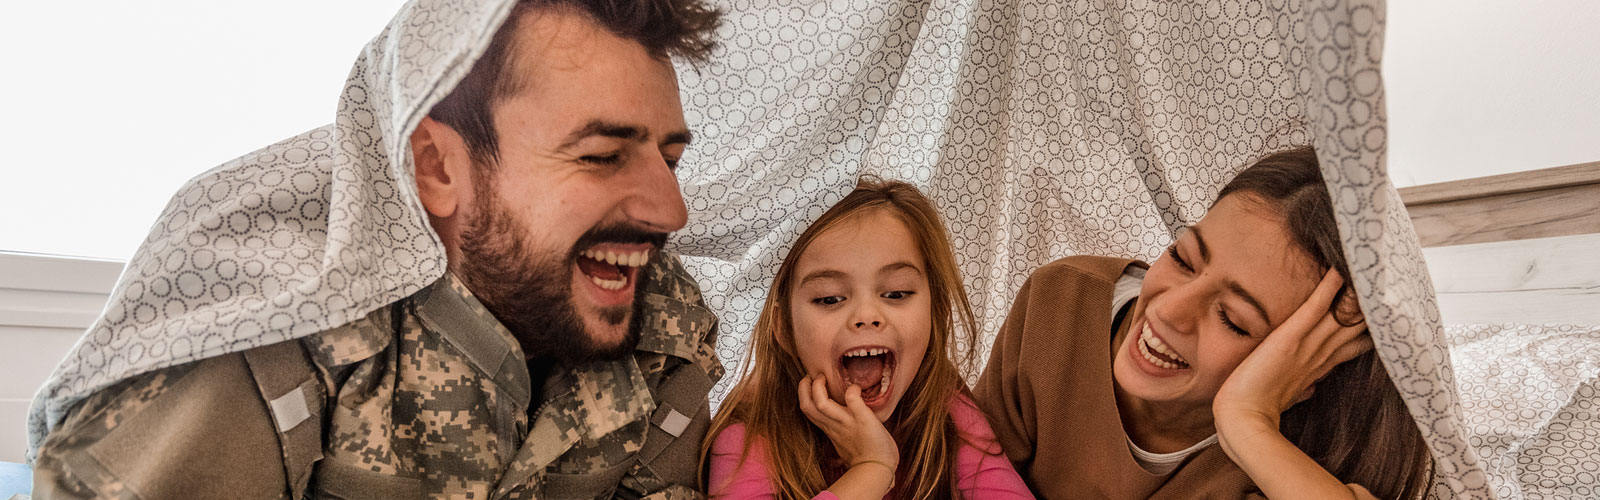 Military family laughing at home